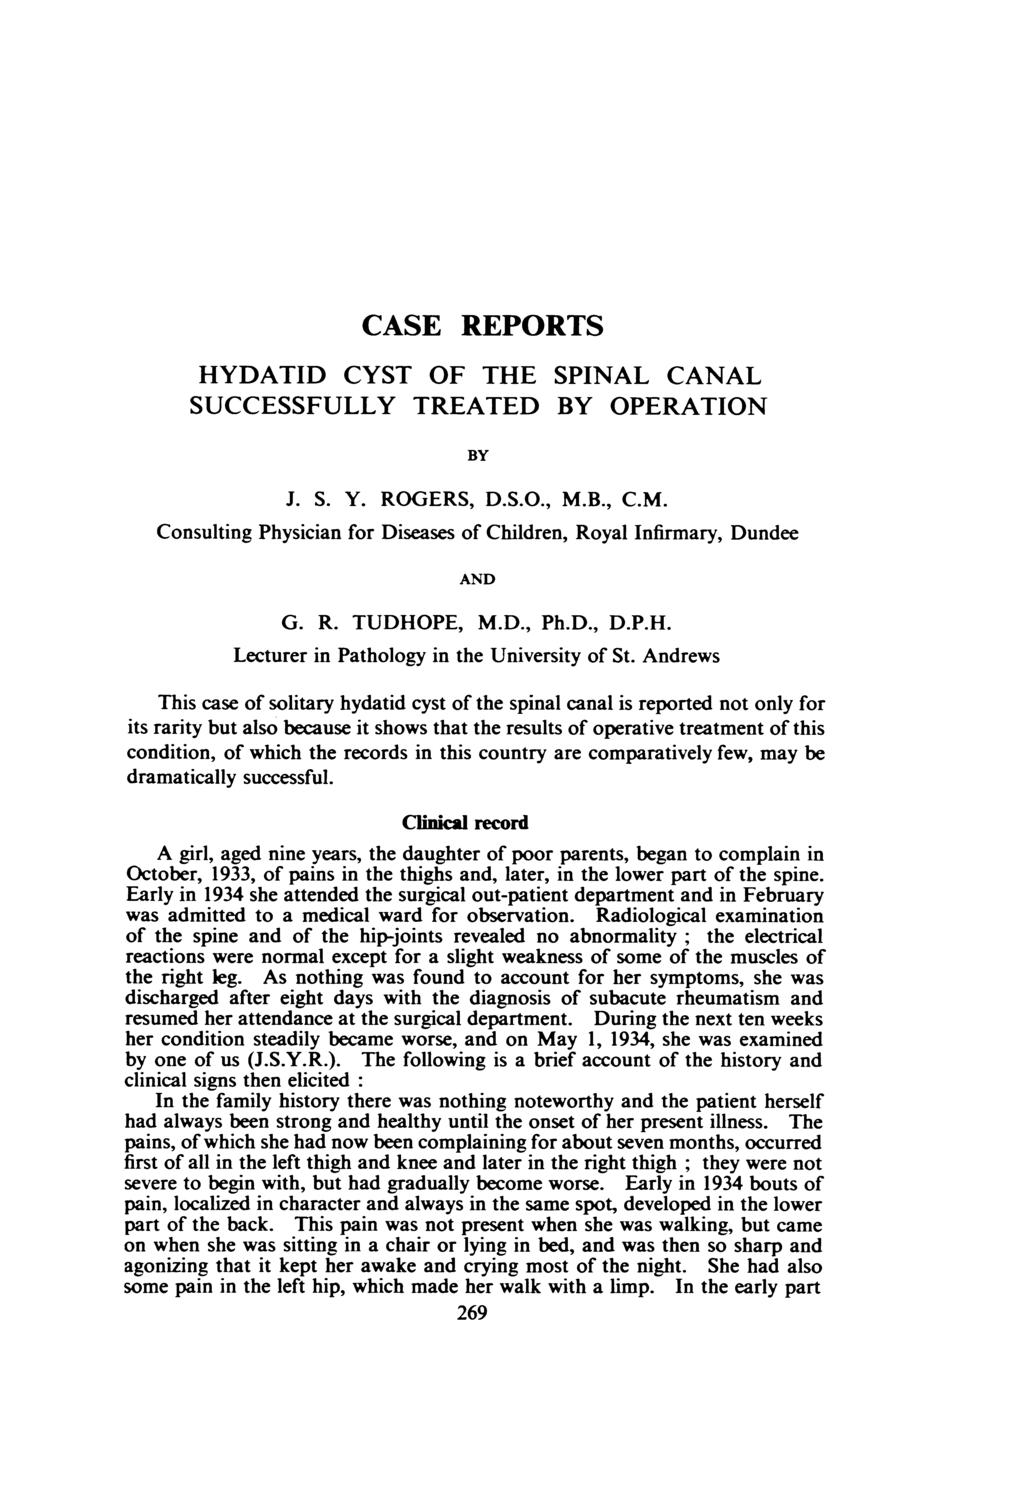 CASE REPORTS HYDATID CYST OF THE SPINAL CANAL SUCCESSFULLY TREATED BY OPERATION BY J. S. Y. ROGERS, D.S.O., M.B., C.M. Consulting Physician for Diseases of Children, Royal Infirmary, Dundee AND G. R. TUDHOPE, M.